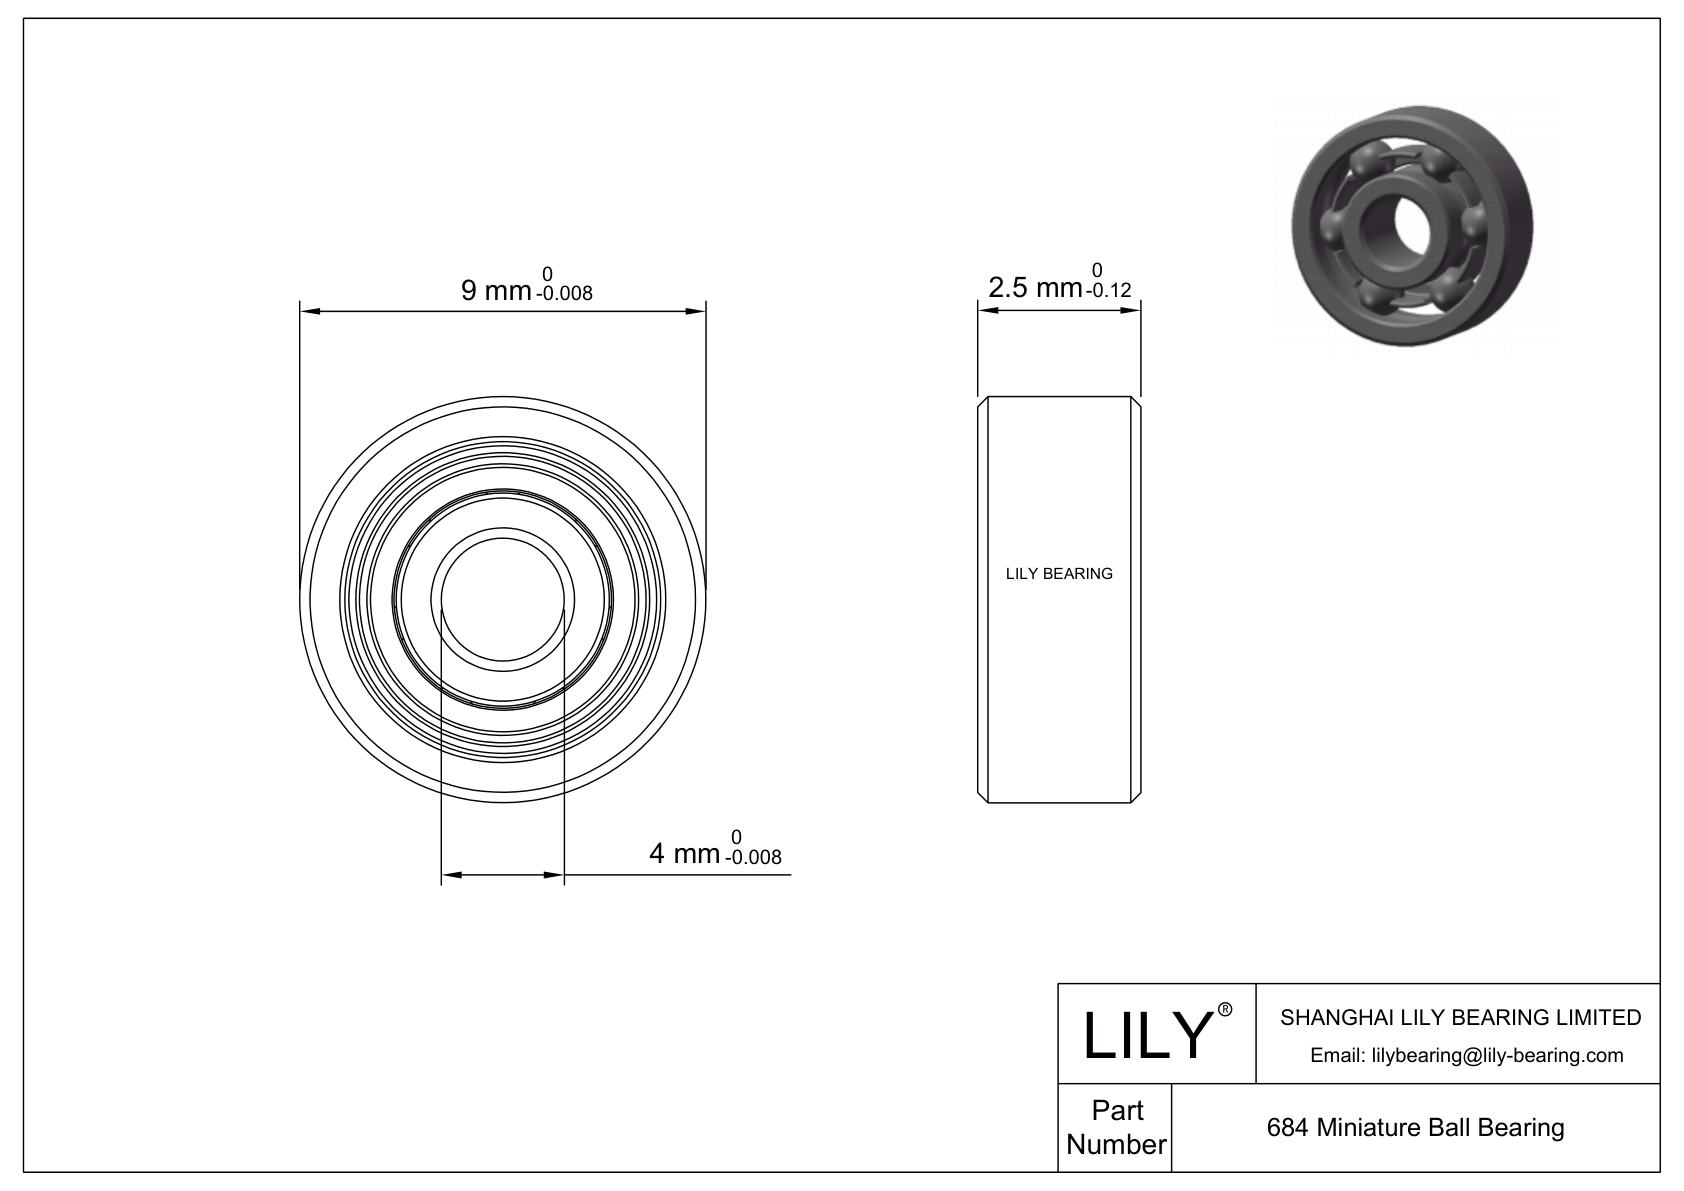 LILY-BS68414-8 POM Coated Bearing cad drawing